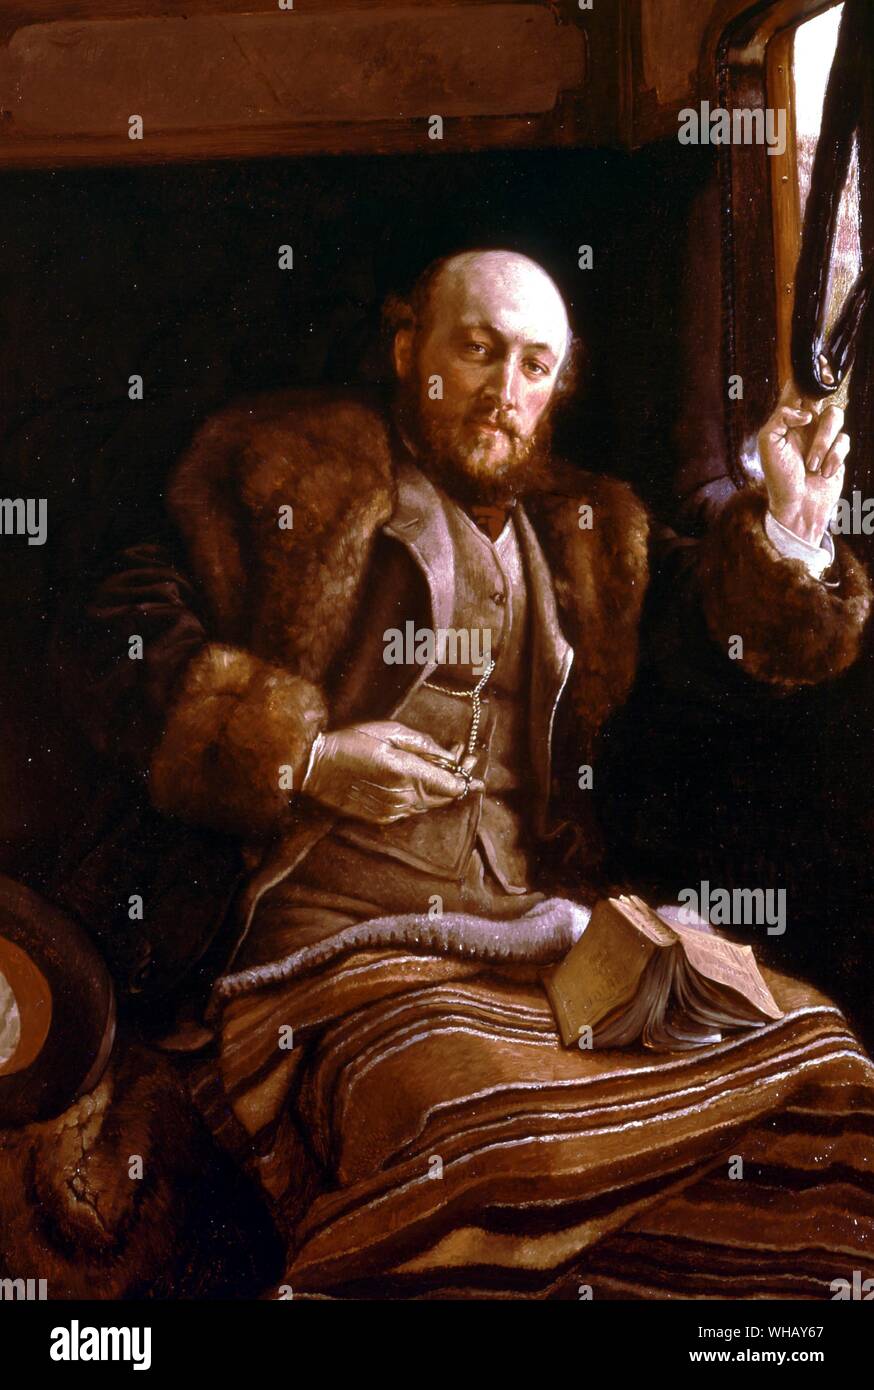 Gentleman in railway carriage by James Tissot (1836 - 1902) mid 1870s. Trollope by C P Snow, page 73. Charles Percy Snow, Baron Snow, CBE (1905-1980). Stock Photo